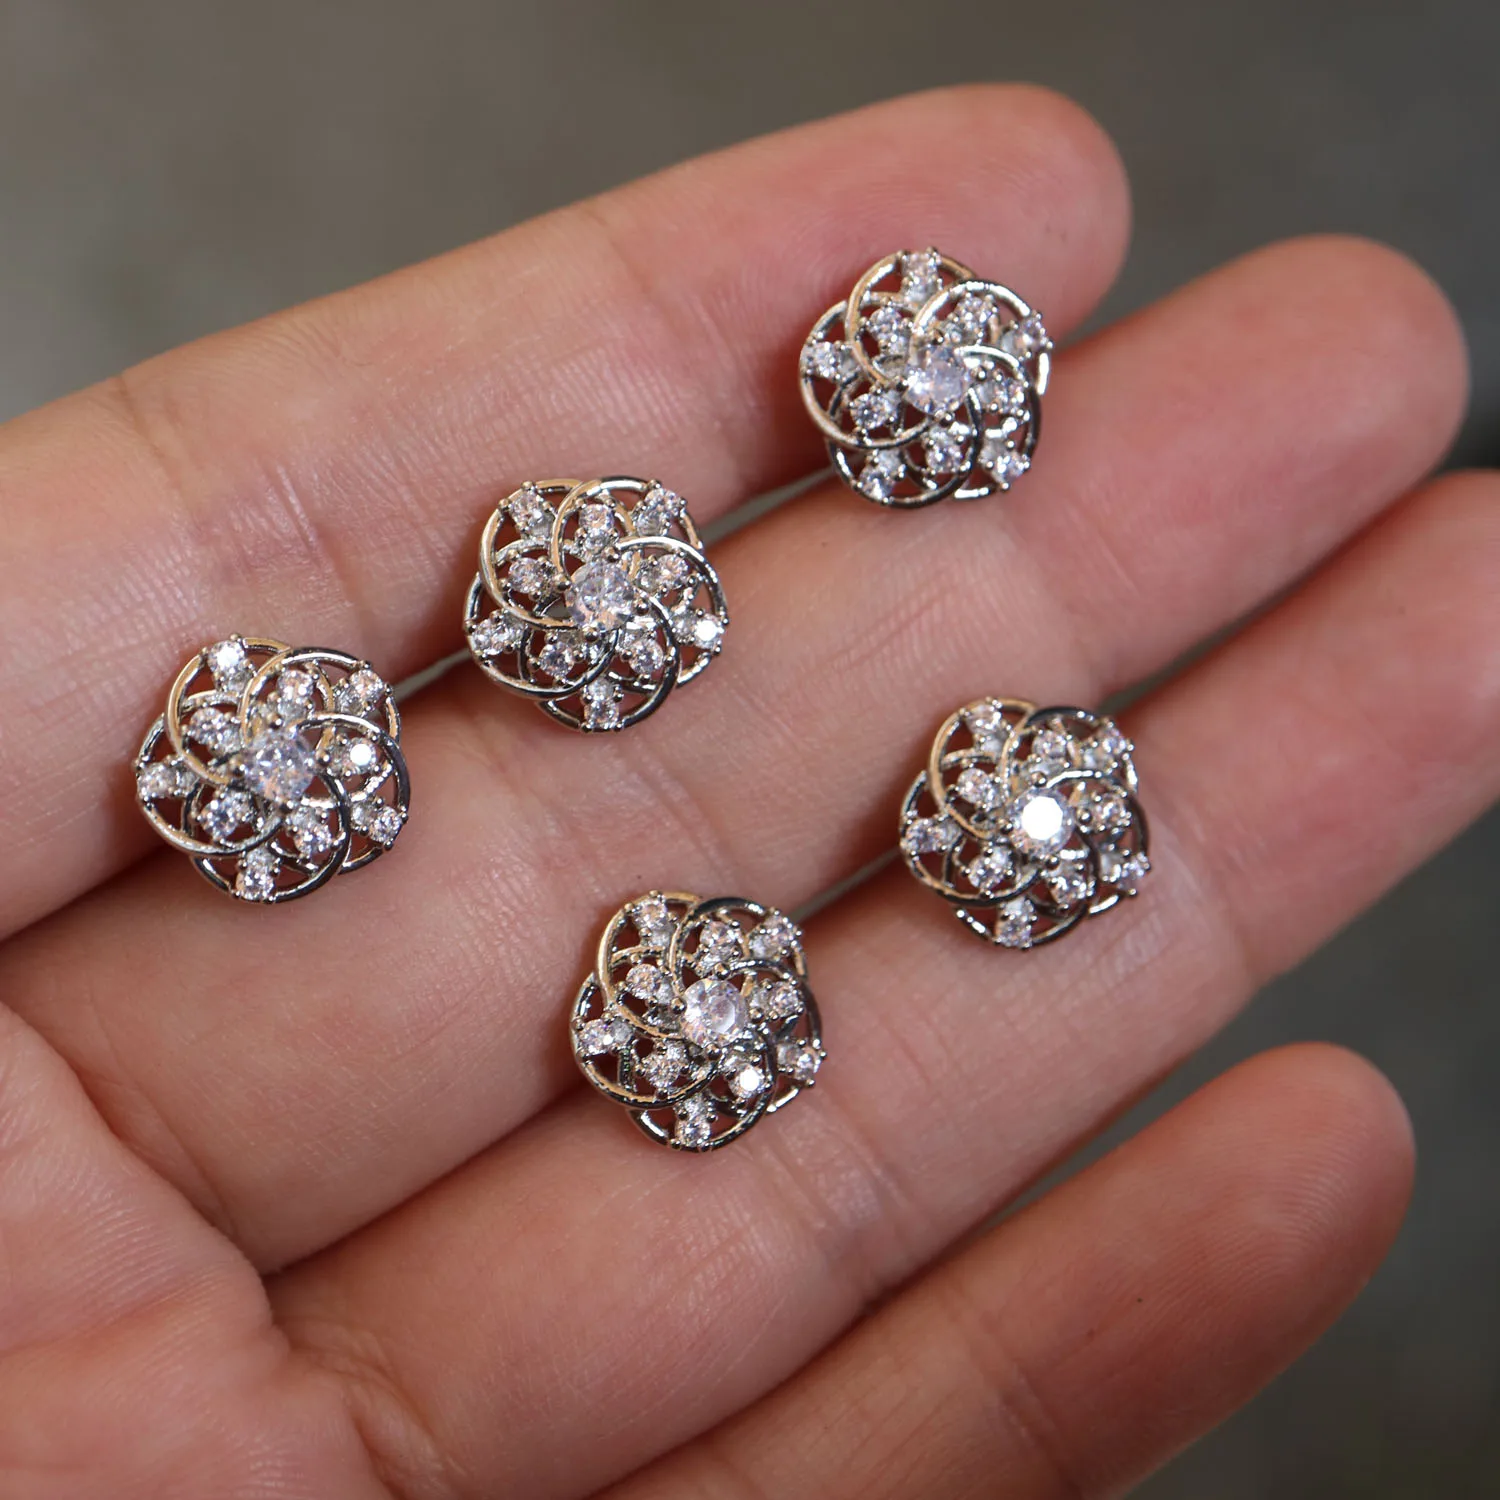 

5pc/lot Shining crystal flower buttons Cubic zirconia button for shirt Decorative CZ sewing buttons for cashmere Knit cardigan